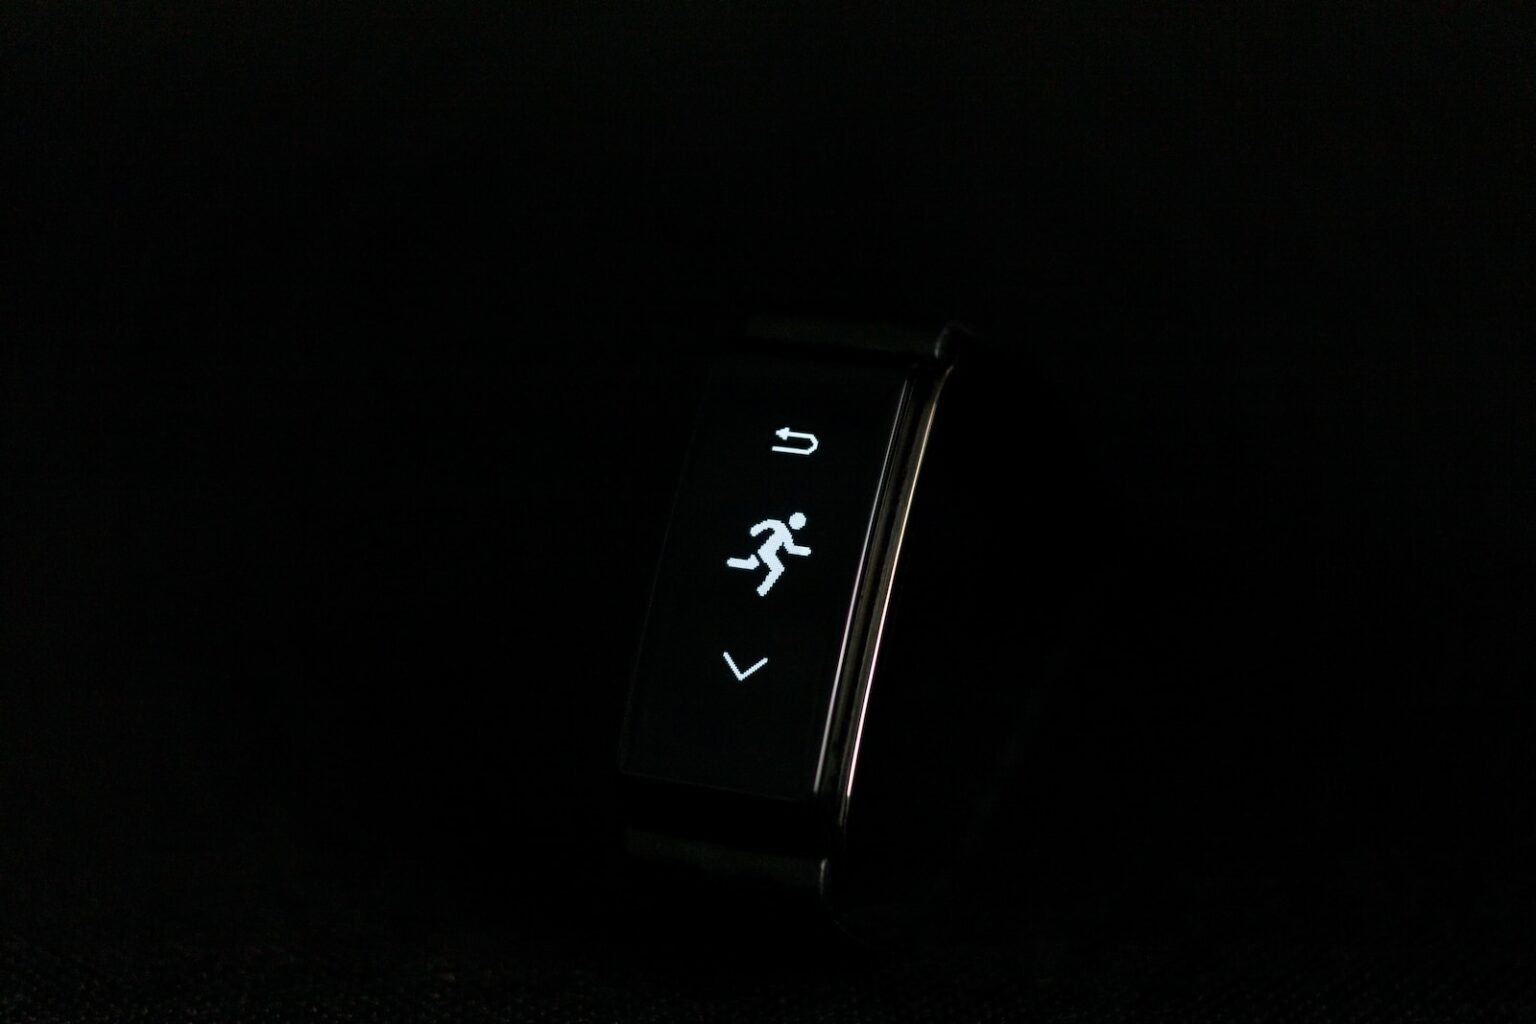 a close up of a watch on a black surface